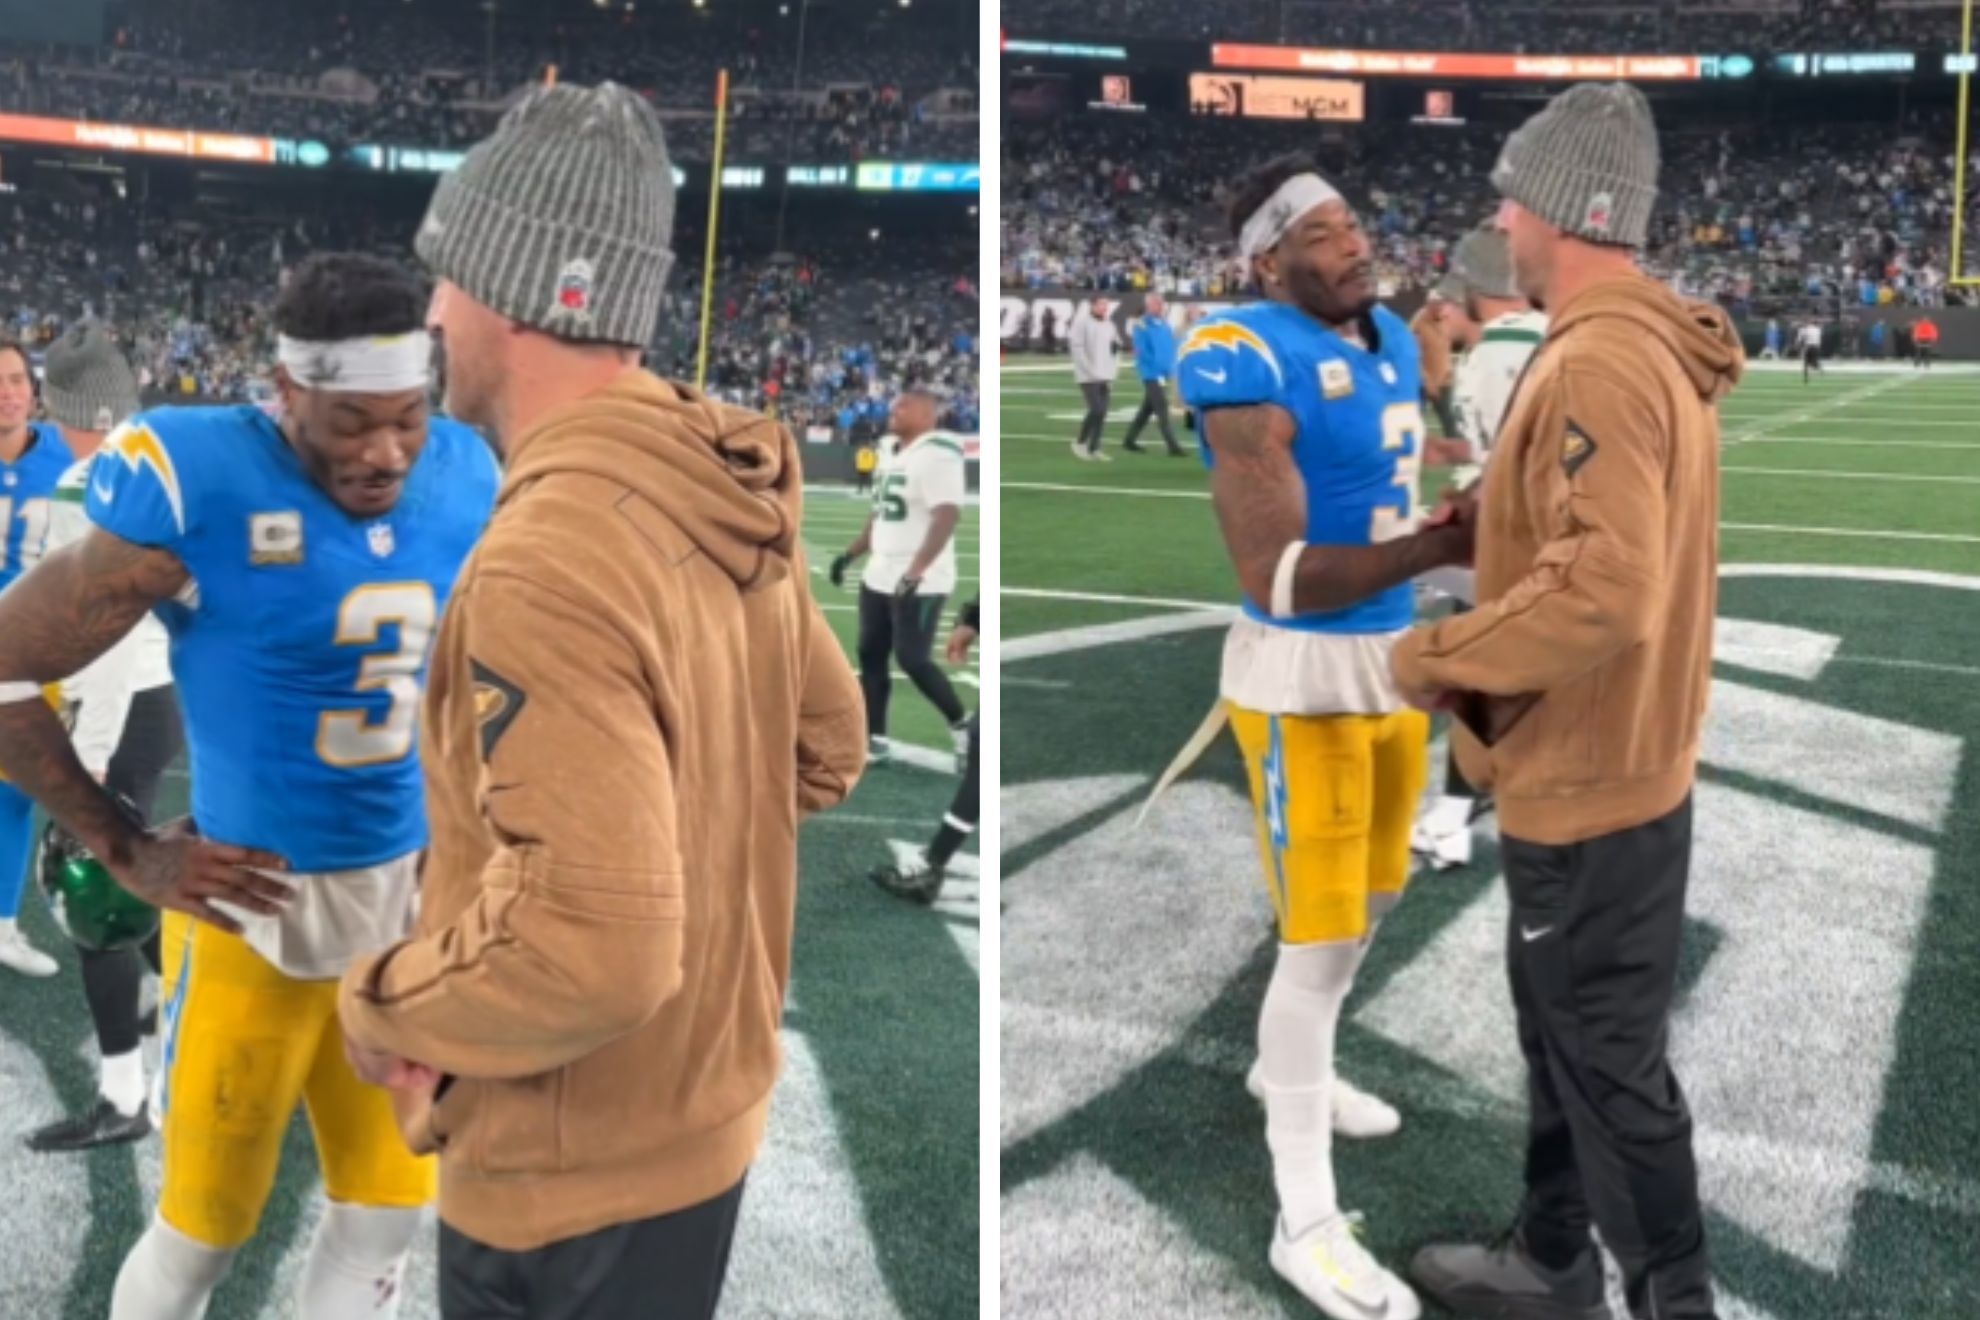 Aaron Rodgers tells Chargers safety Derwin James when he will return to play